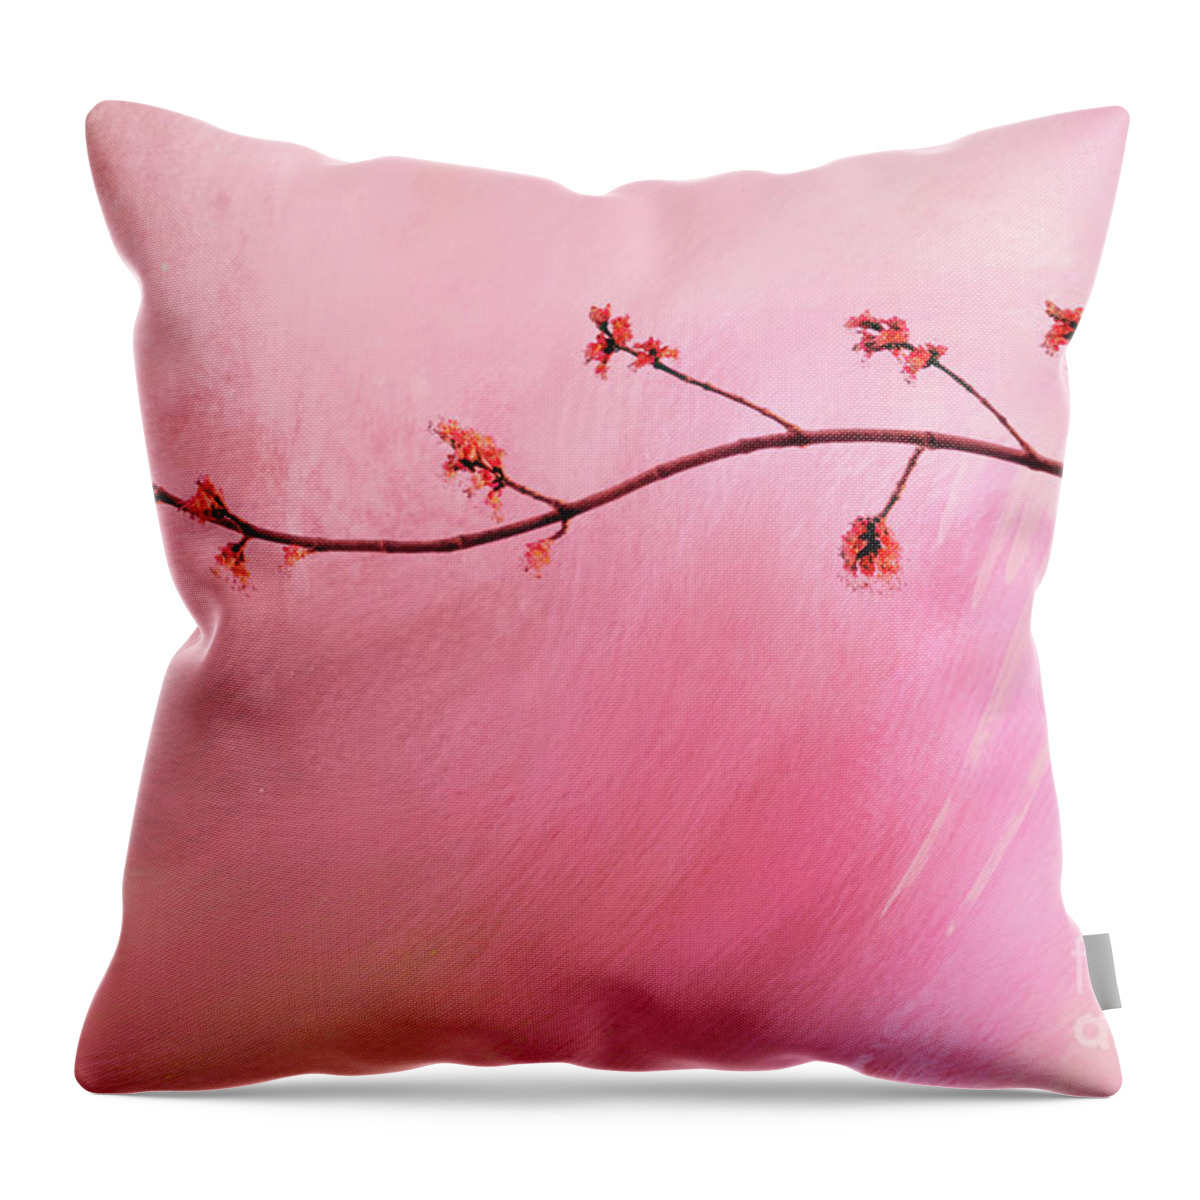 Abstract Throw Pillow featuring the photograph Abstract Maple Flower Branch by Anita Pollak